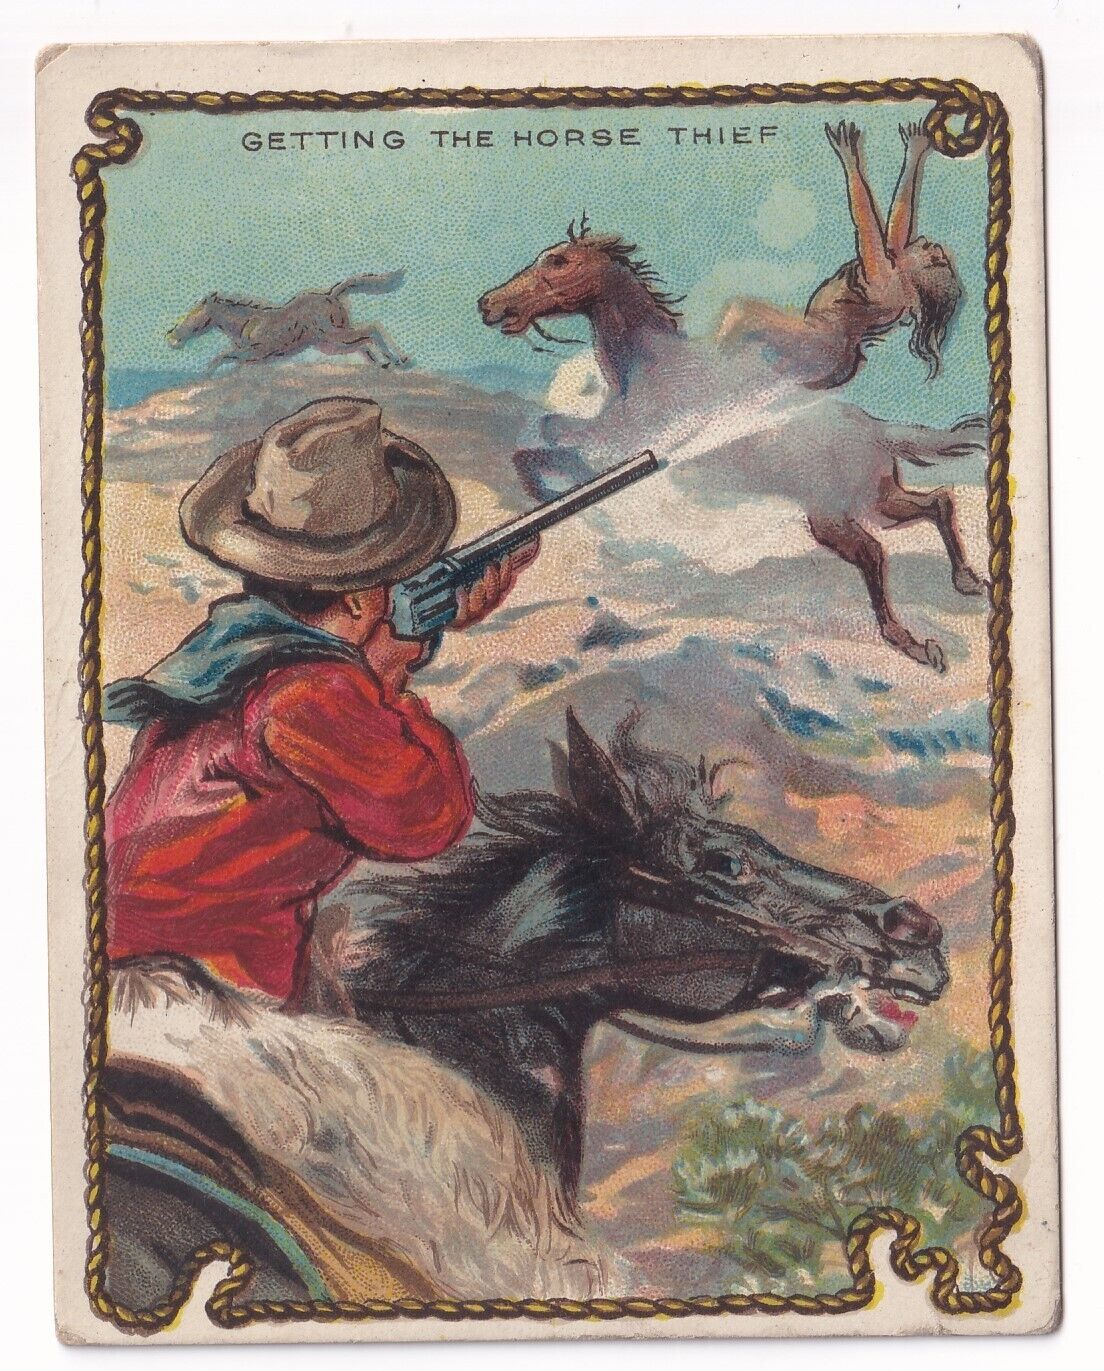 1910 Hassan Cowboy Series Getting The Horse Thief